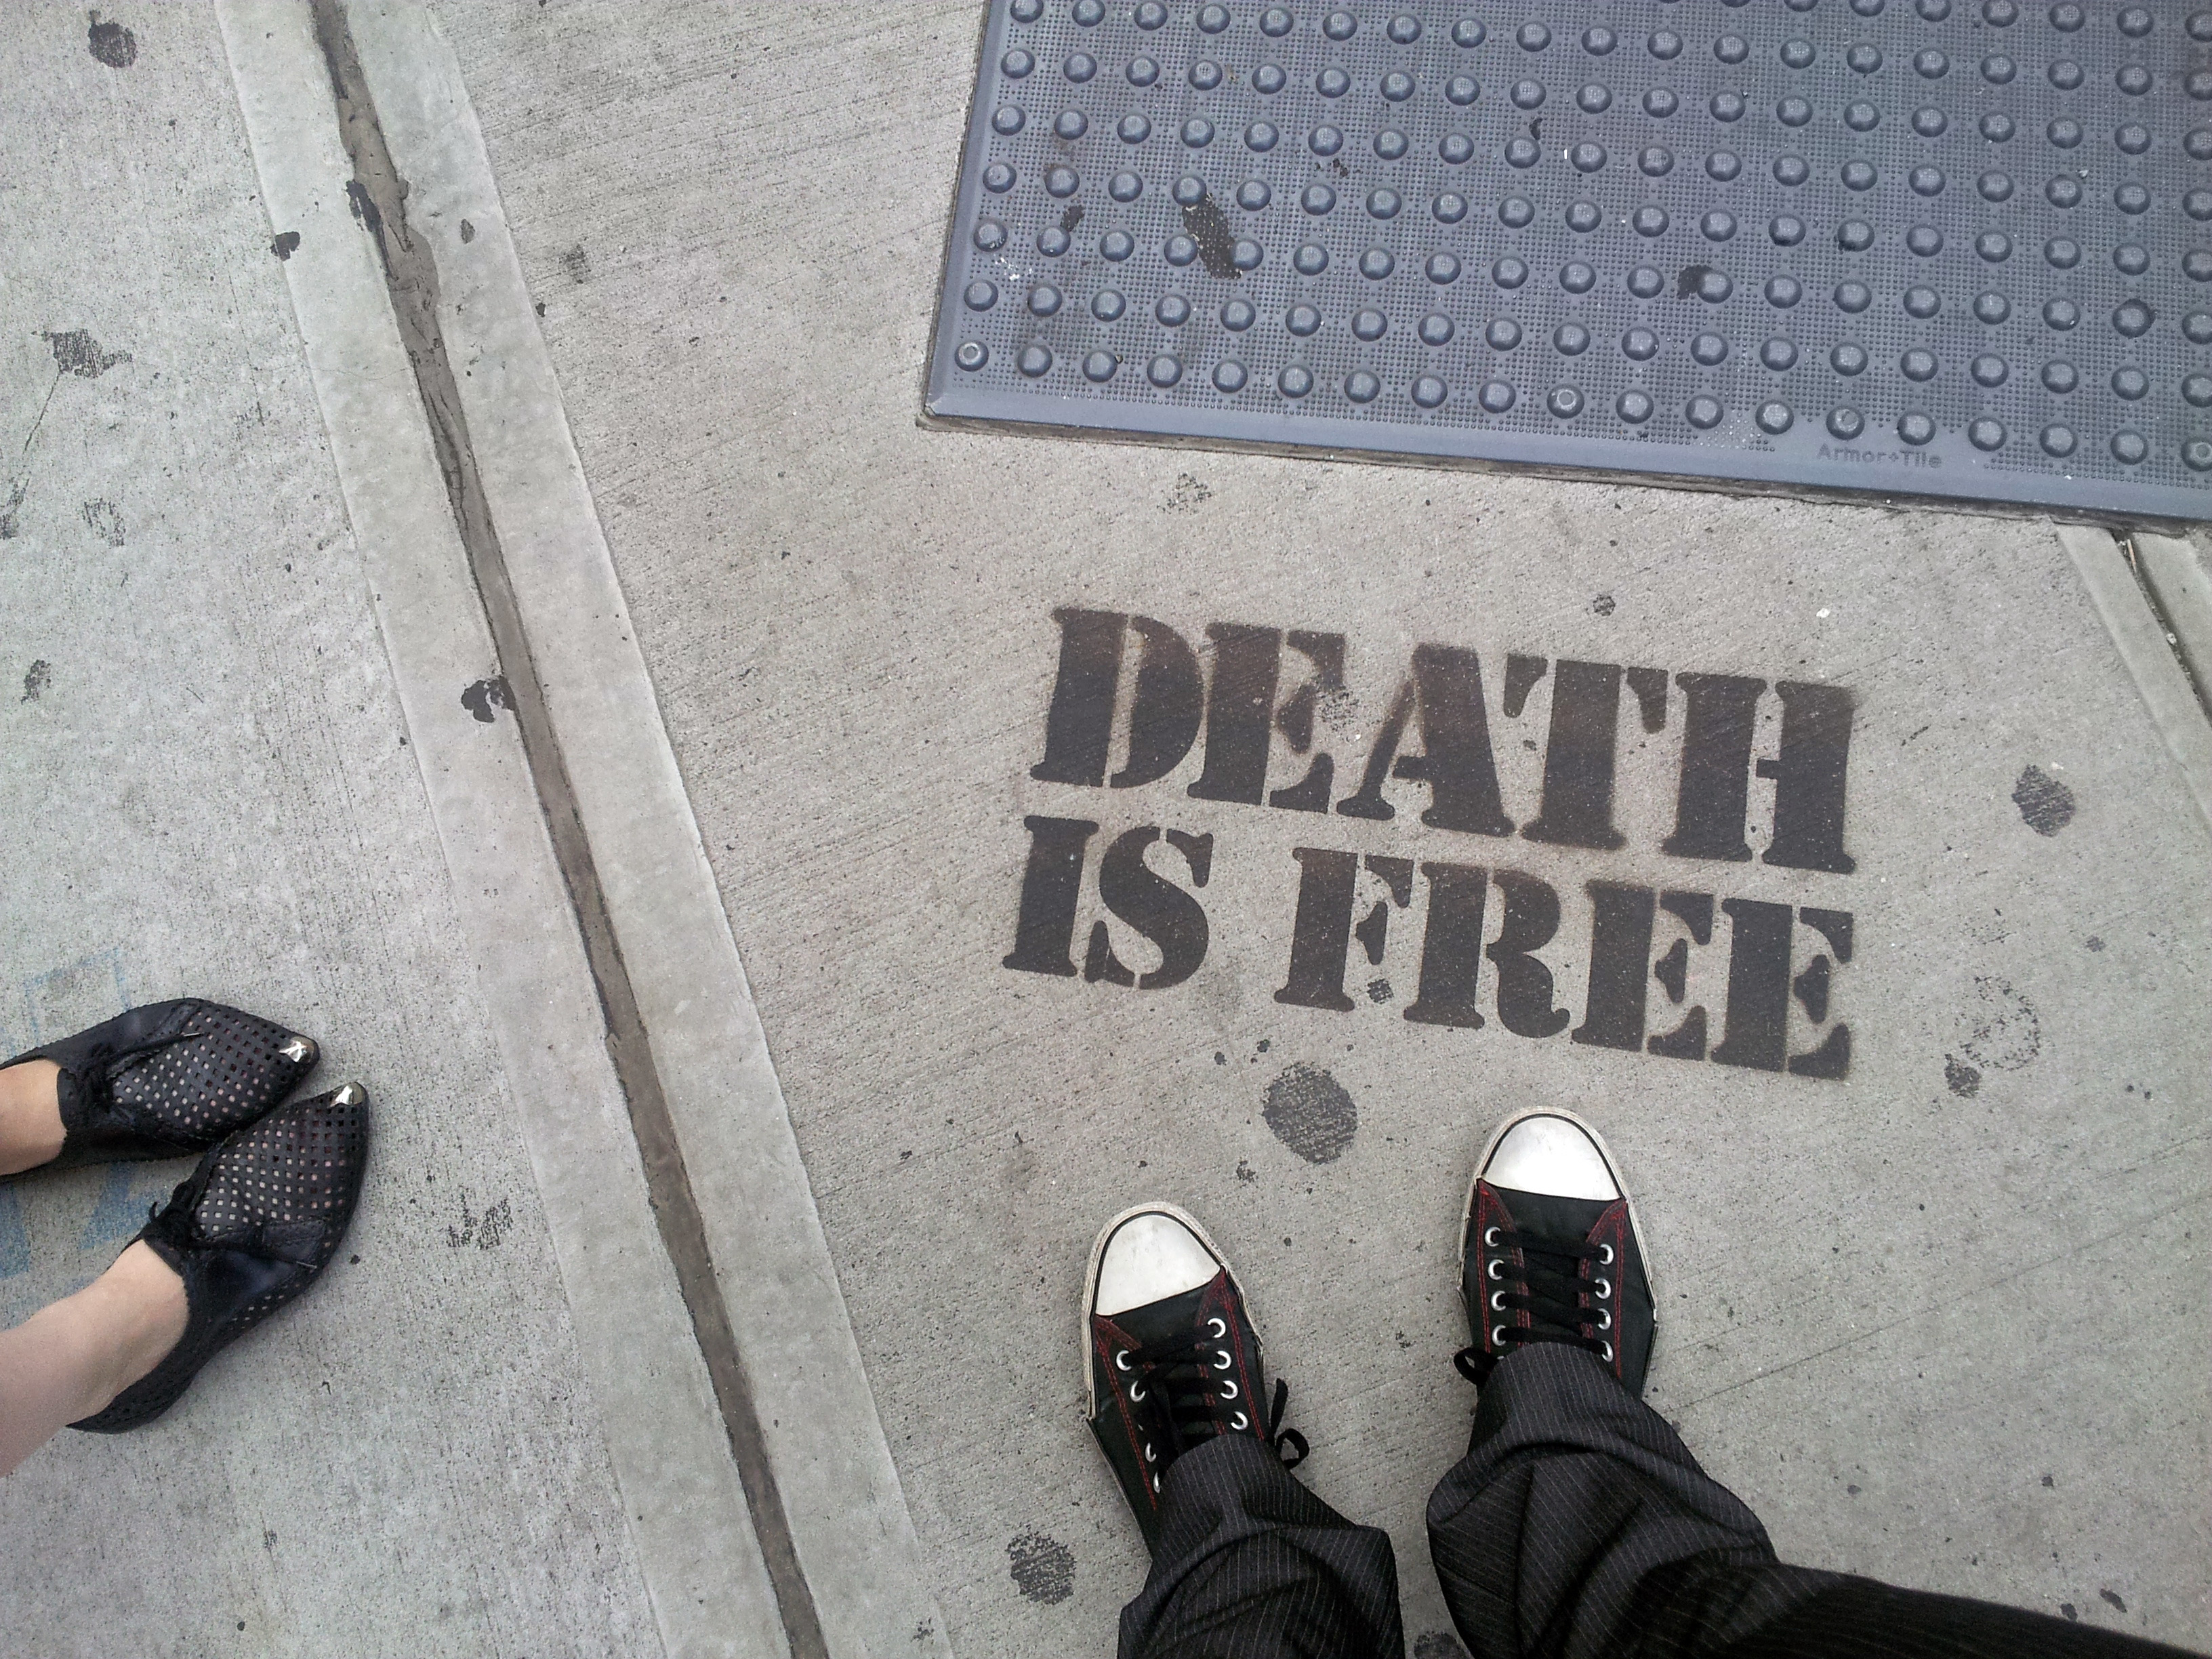 Street stencil that says Death is Free. Anna and my shoes are visible.